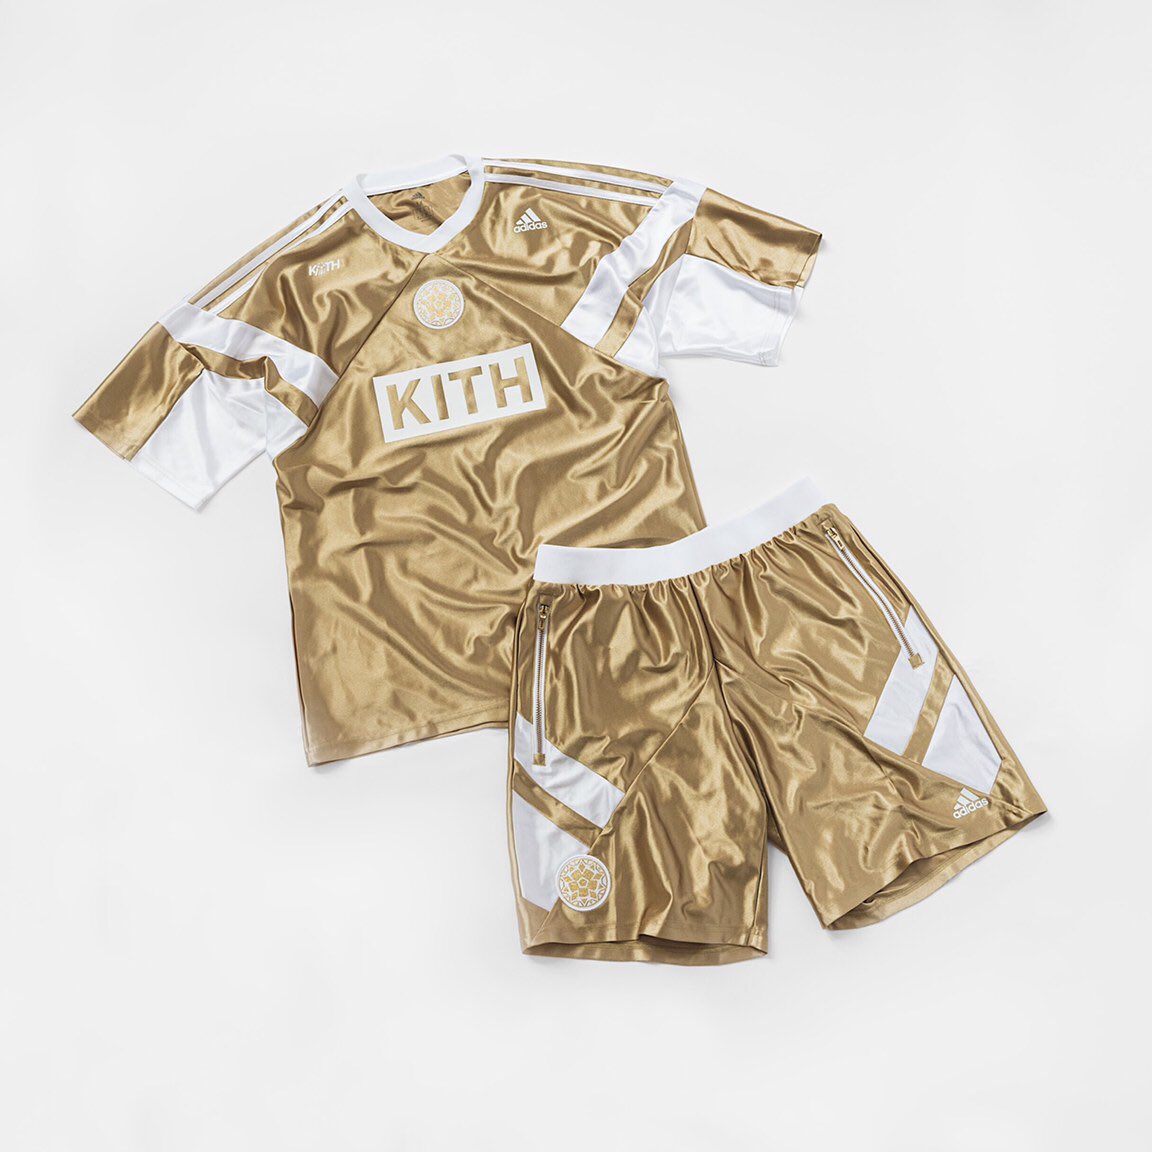 Oustanding USA 94 Inspired Adidas x Kith 2018 Chapter 3: Golden Goal